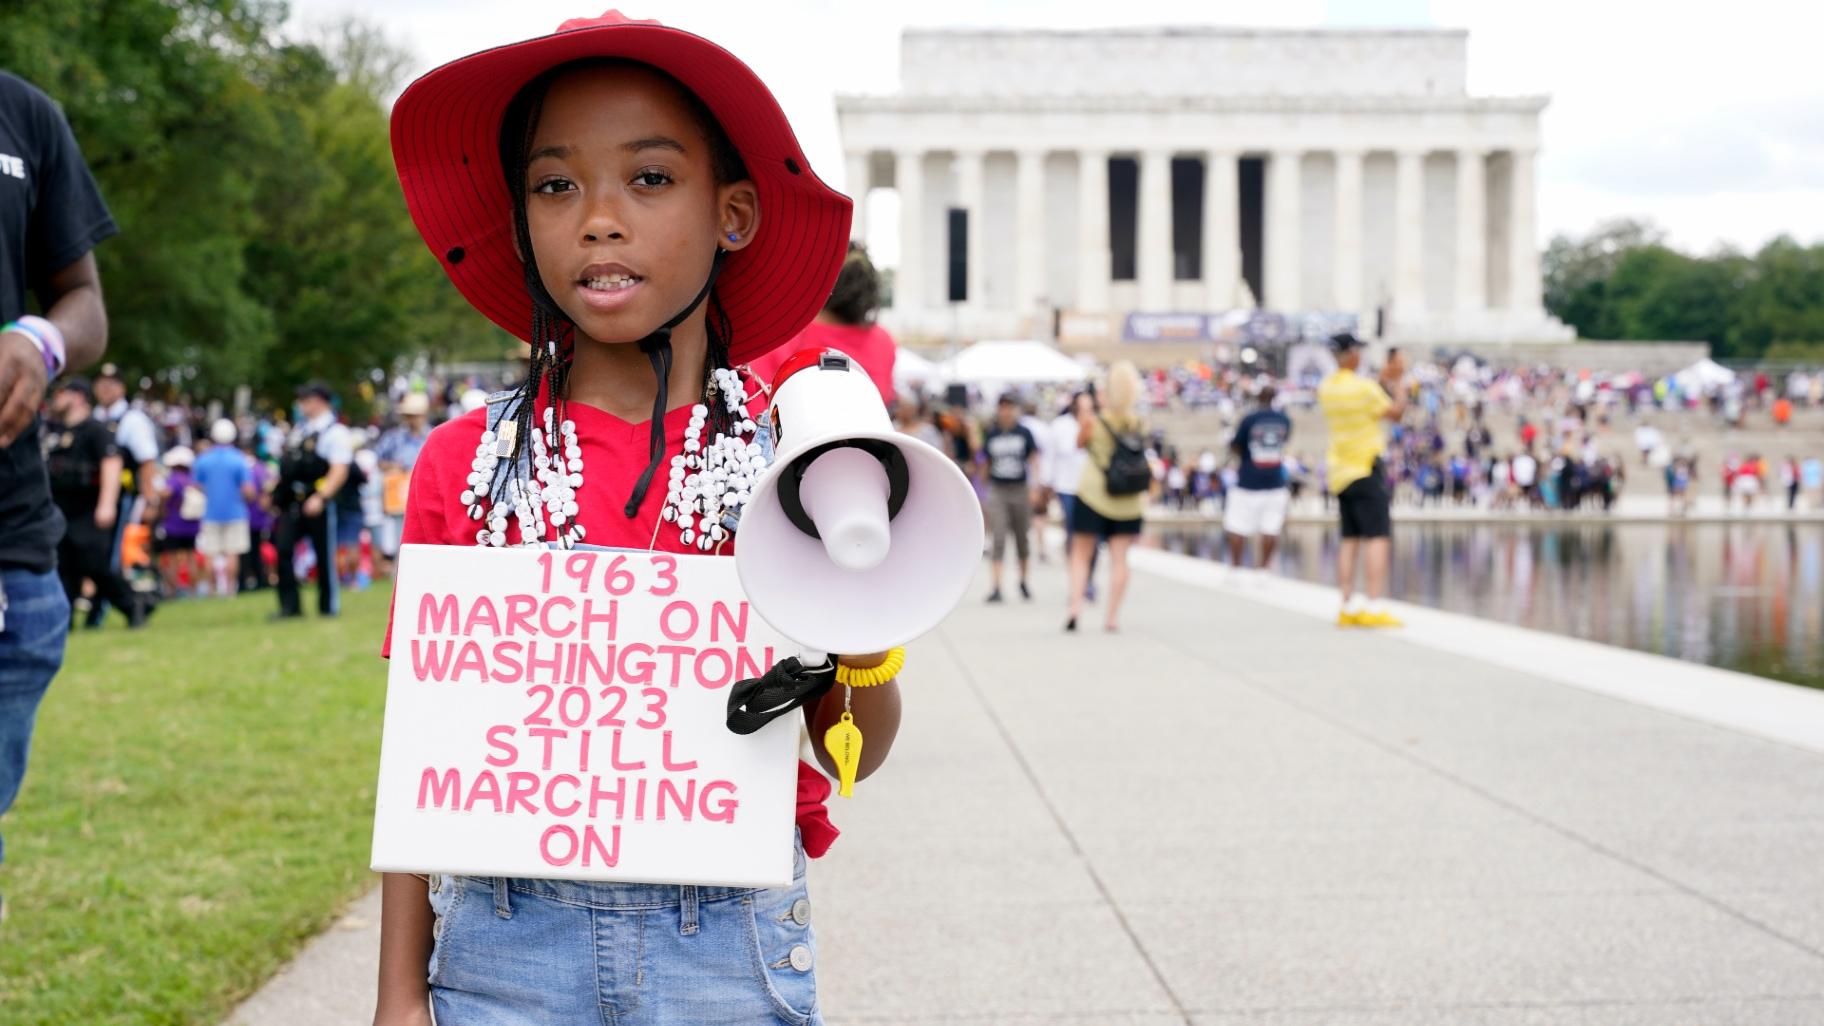 T'Kyrra Terrell, 6, who her grandmother says has been marching and protesting since she was 2, poses for a portrait on her way to the 60th Anniversary of the March on Washington at the Lincoln Memorial, Saturday, Aug. 26, 2023, in Washington. (AP Photo / Jacquelyn Martin)